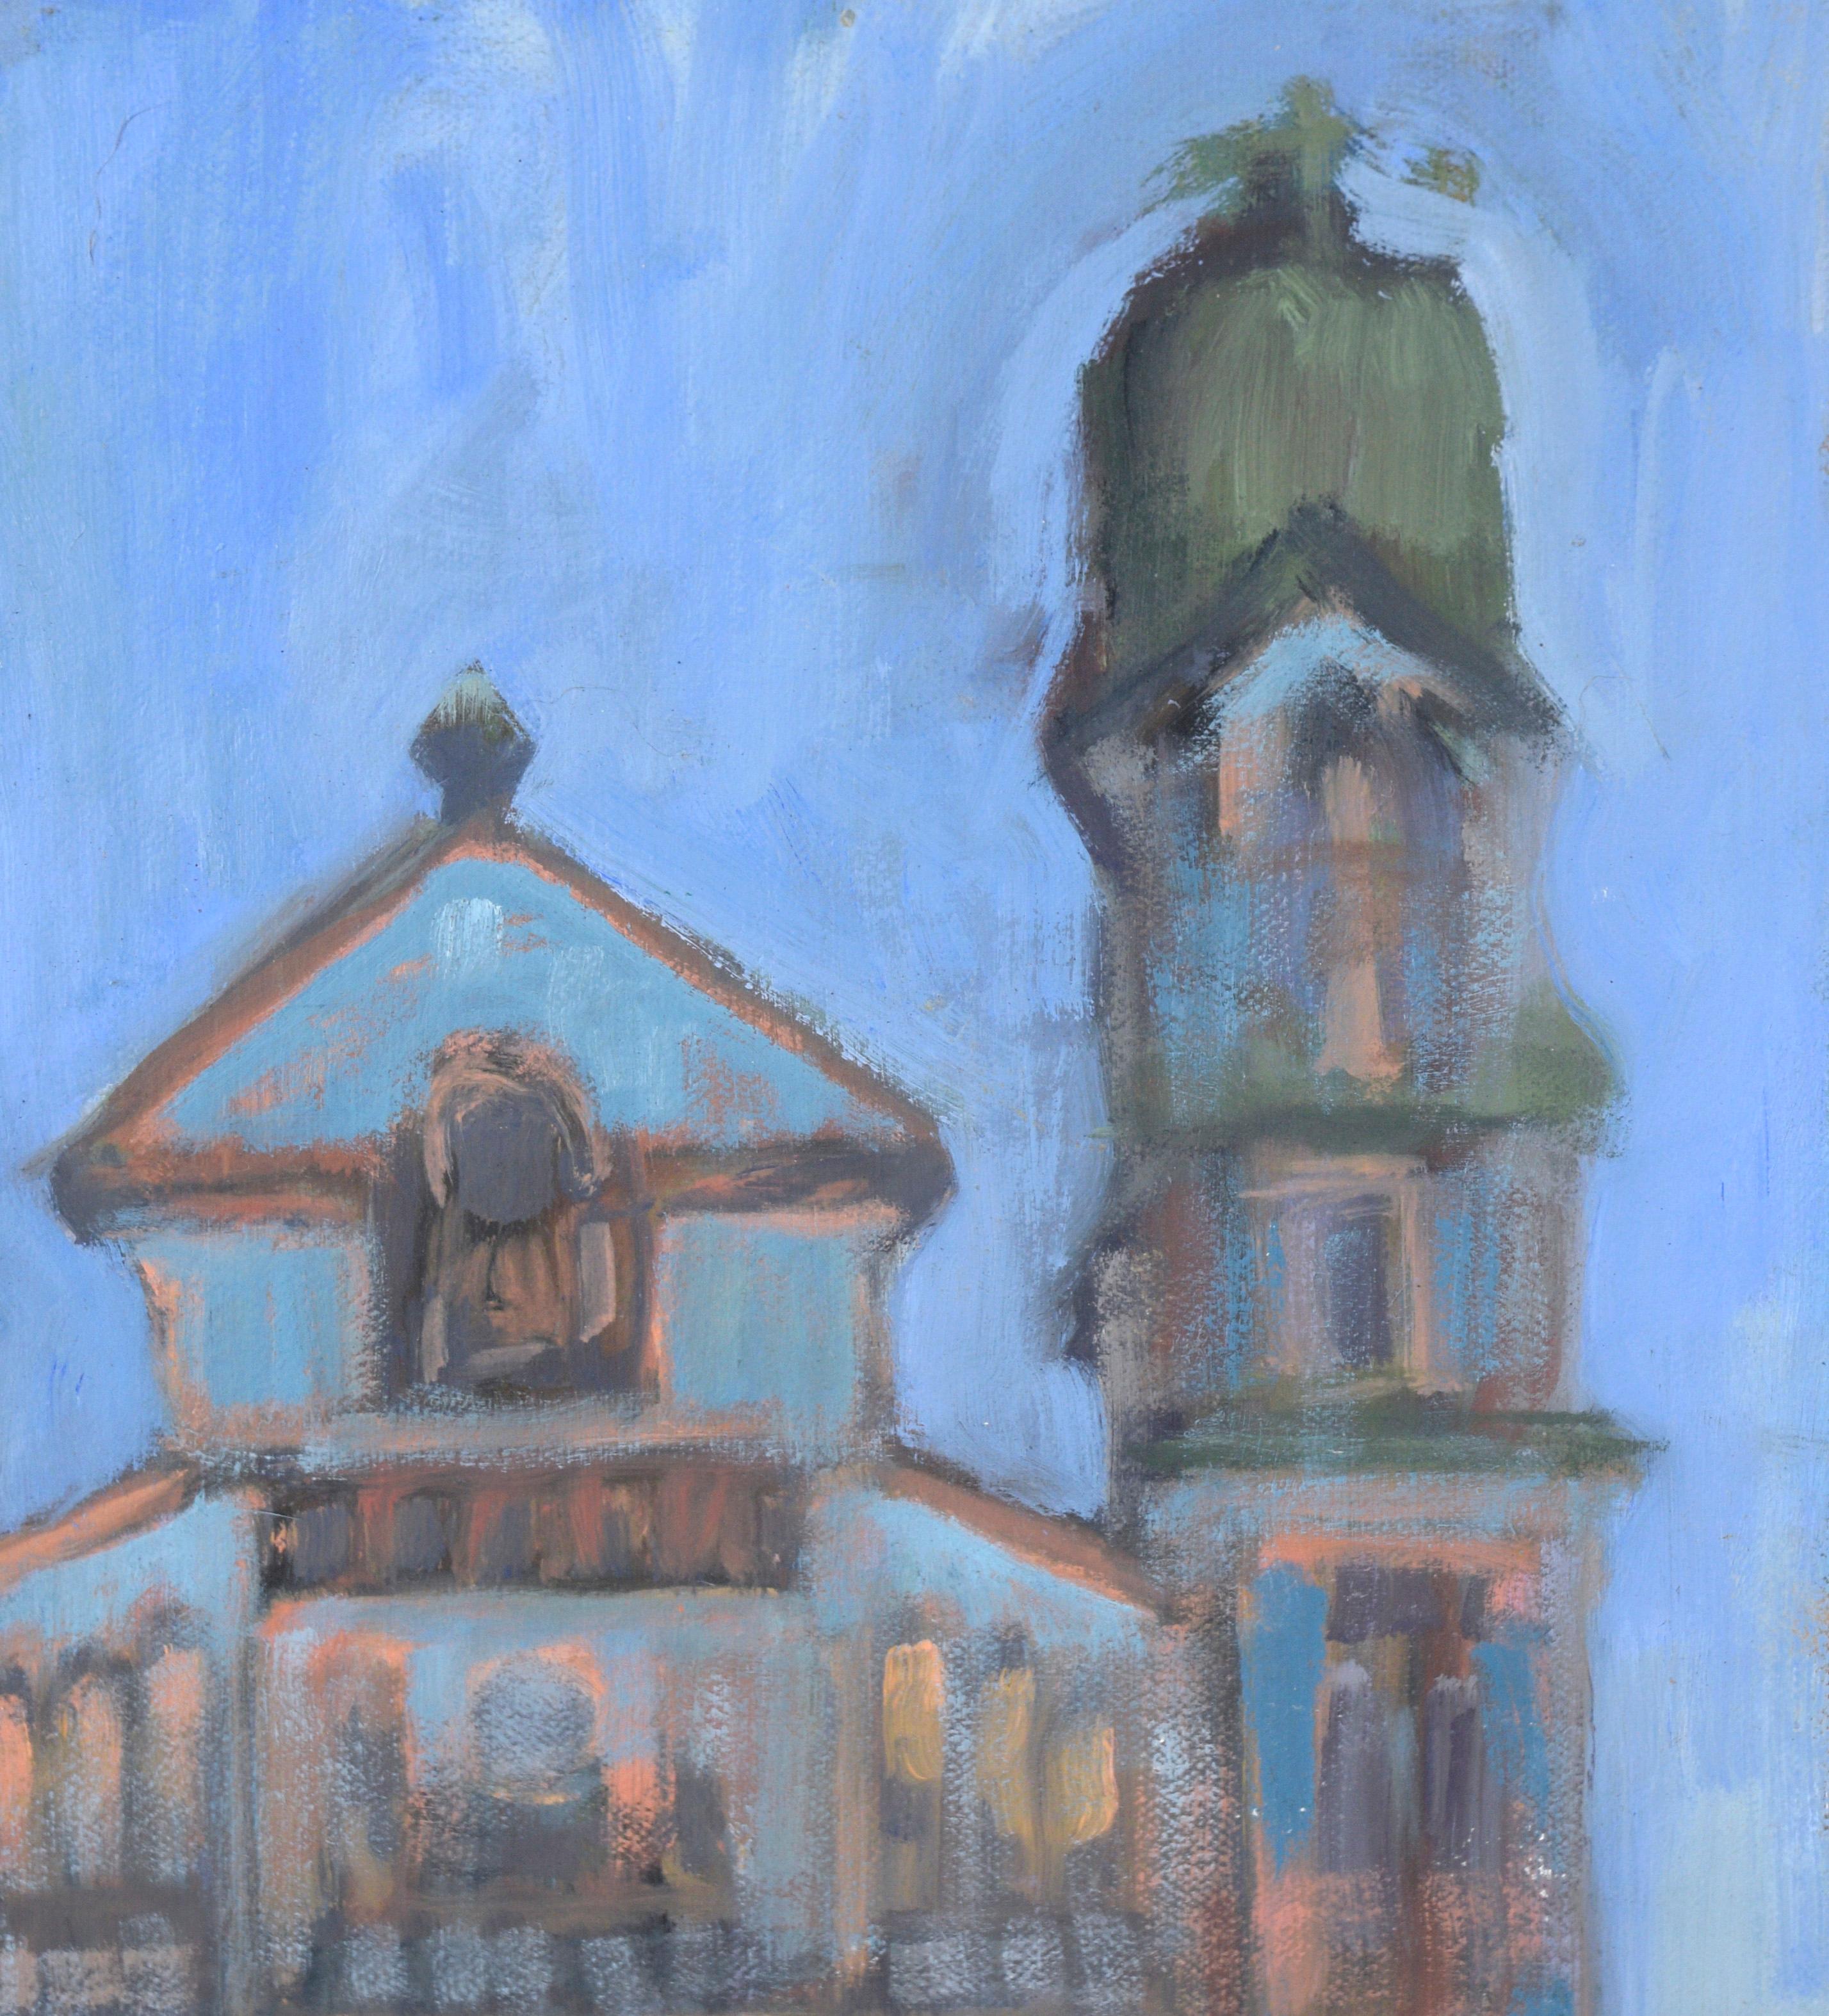 Cathedral with Green Domes in Acrylic on Masonite - American Impressionist Painting by M. Pavao